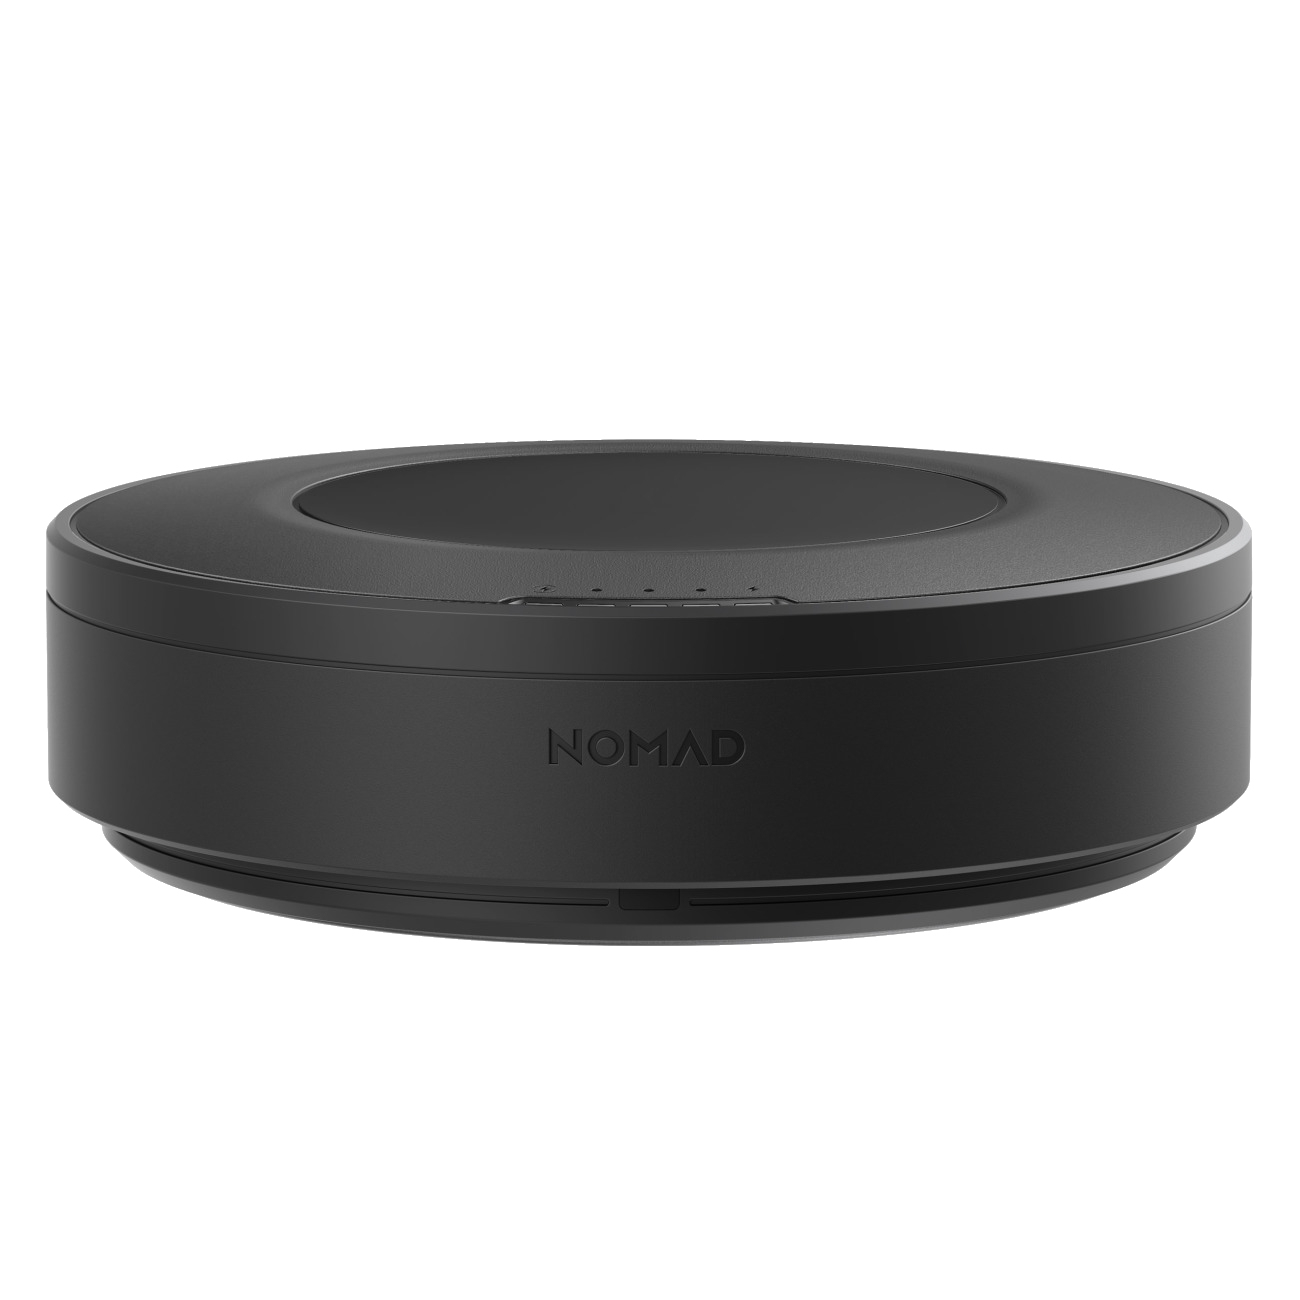 Nomad 5 Hub Wireless Charger Black